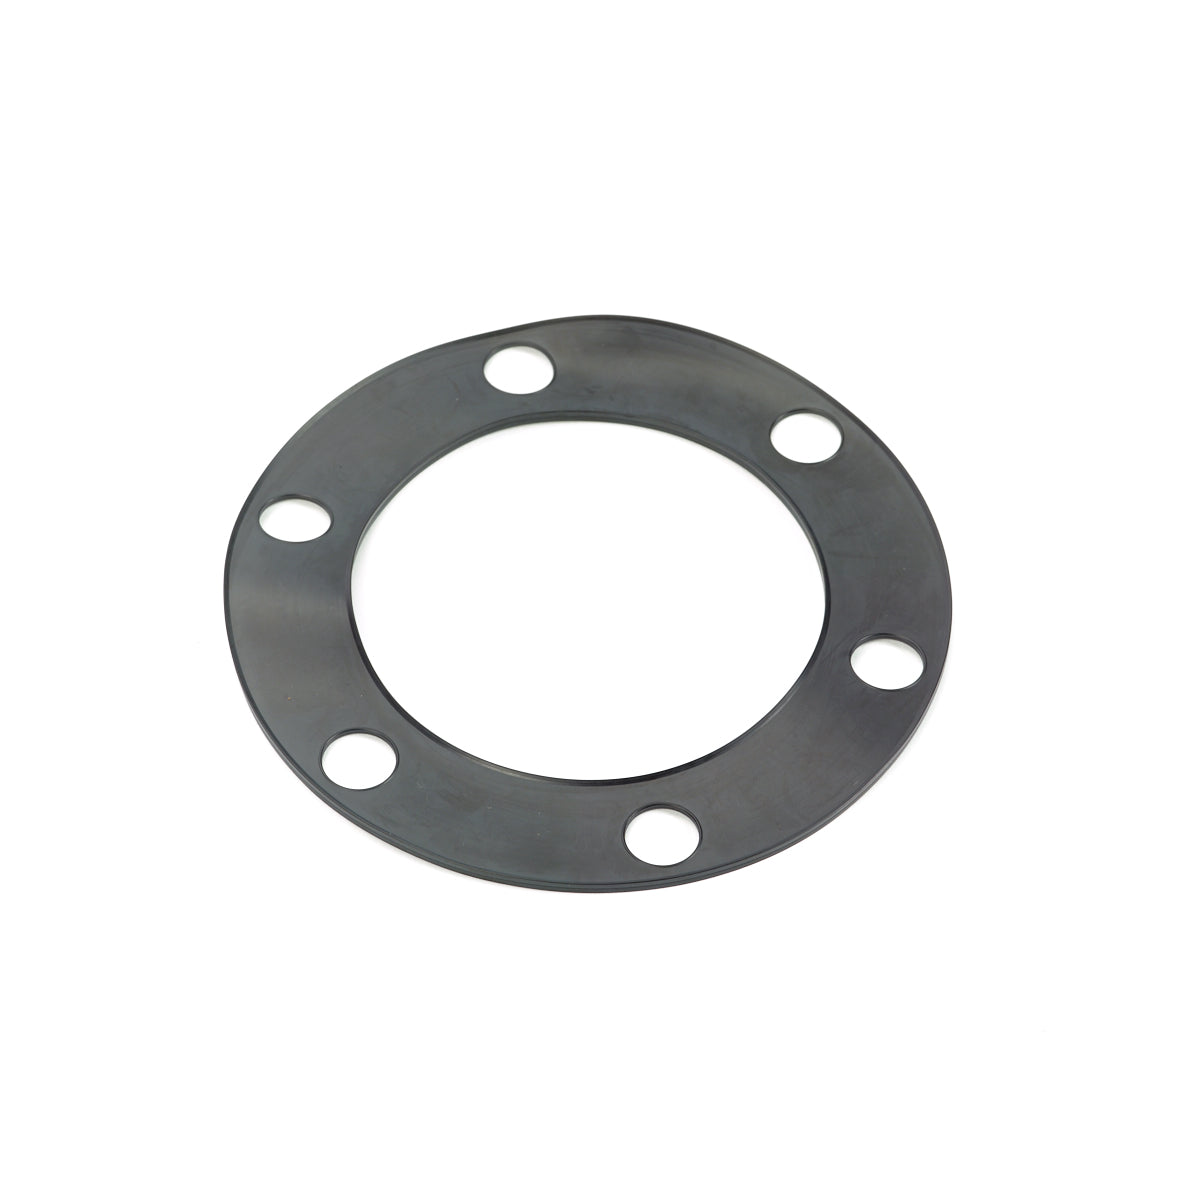 GASKET - HYDRAULIC FILTER COVER: 813/10186